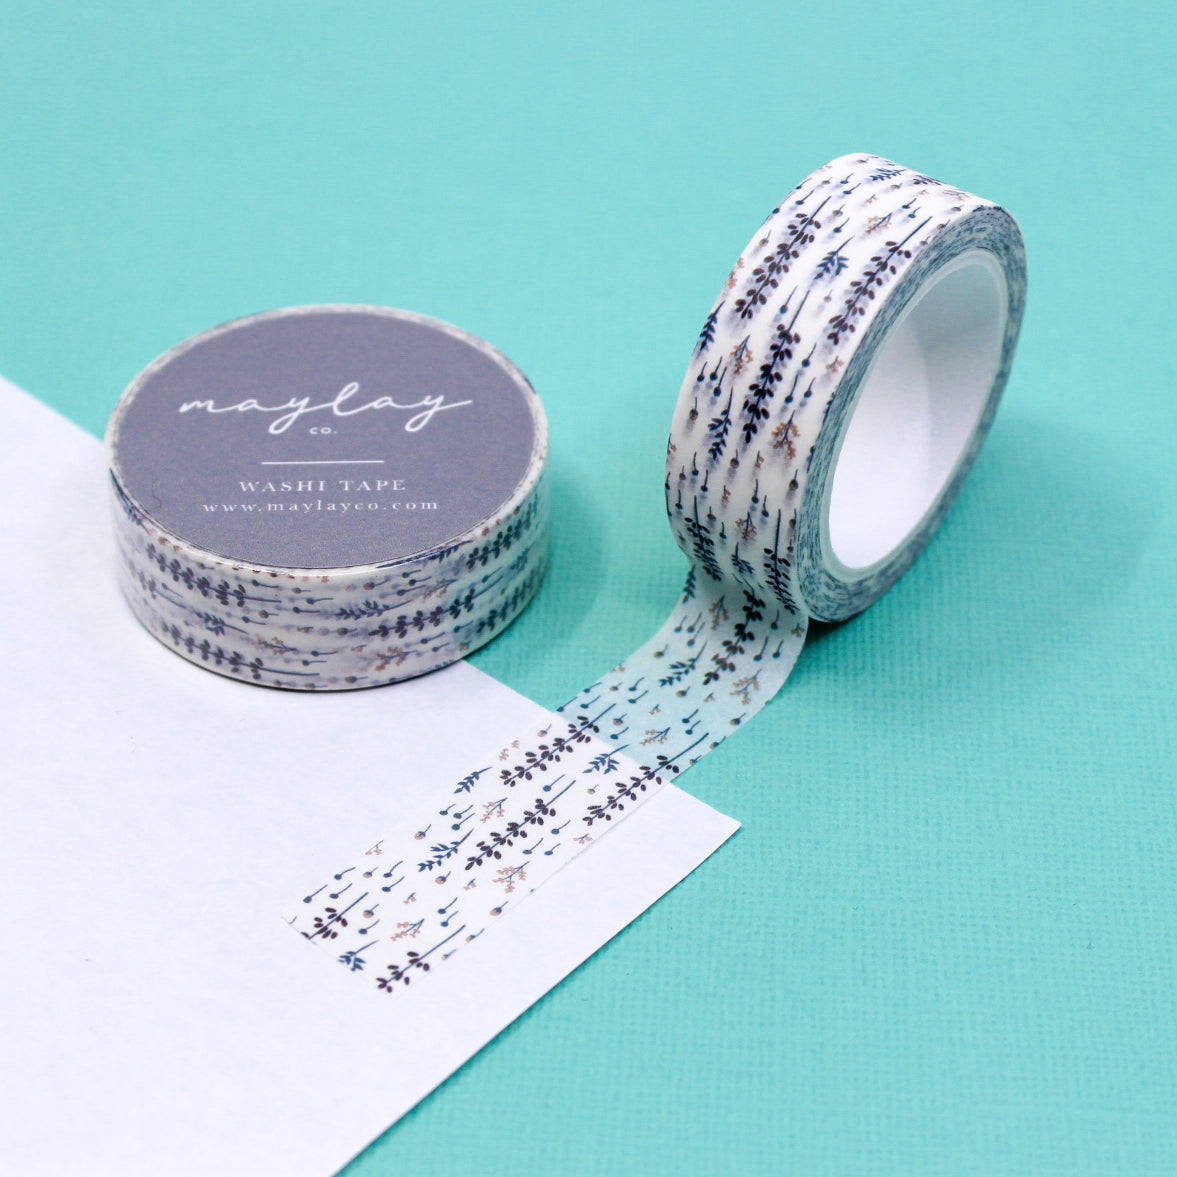 Elevate your crafts with our Lovely Lavender Washi Tape, featuring a soothing lavender-colored design. Ideal for adding a touch of relaxation and elegance to your projects. This tape is designed by Maylay Co. and sold at BBB Supplies Craft Shop.